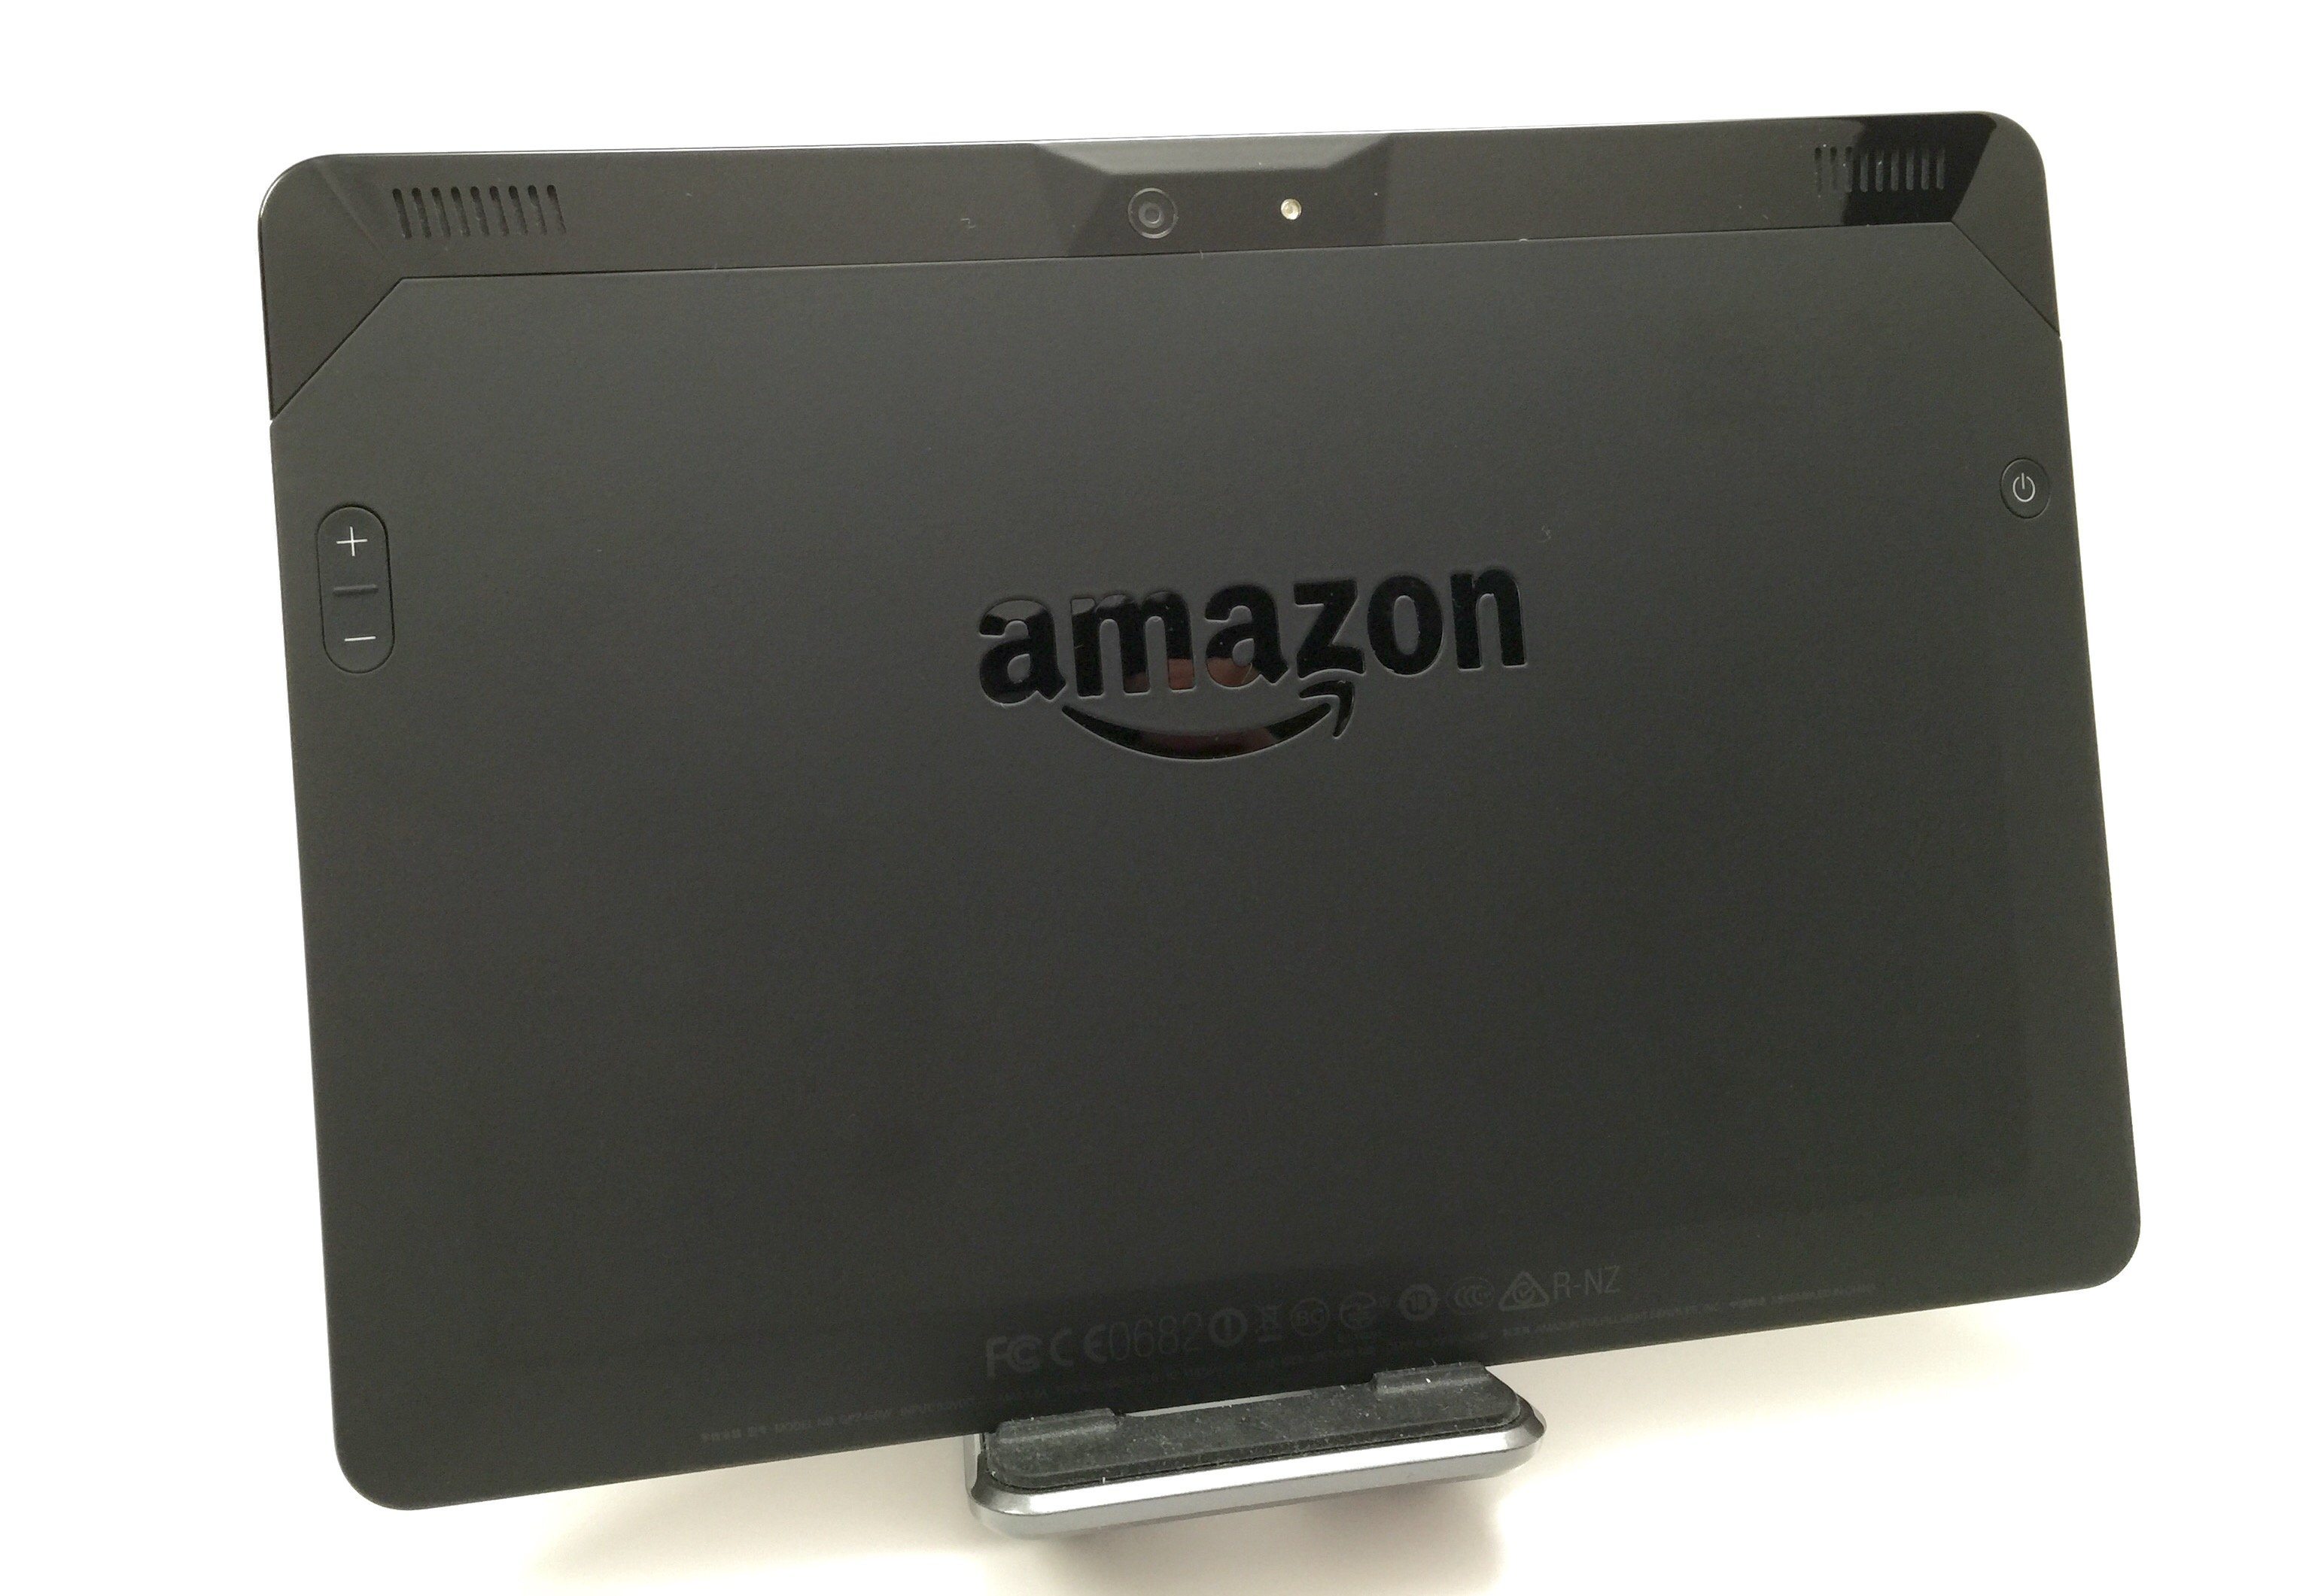 Read our Amazon Fire HDX 8.9 Review to find out why this is an excellent entertainment tablet.